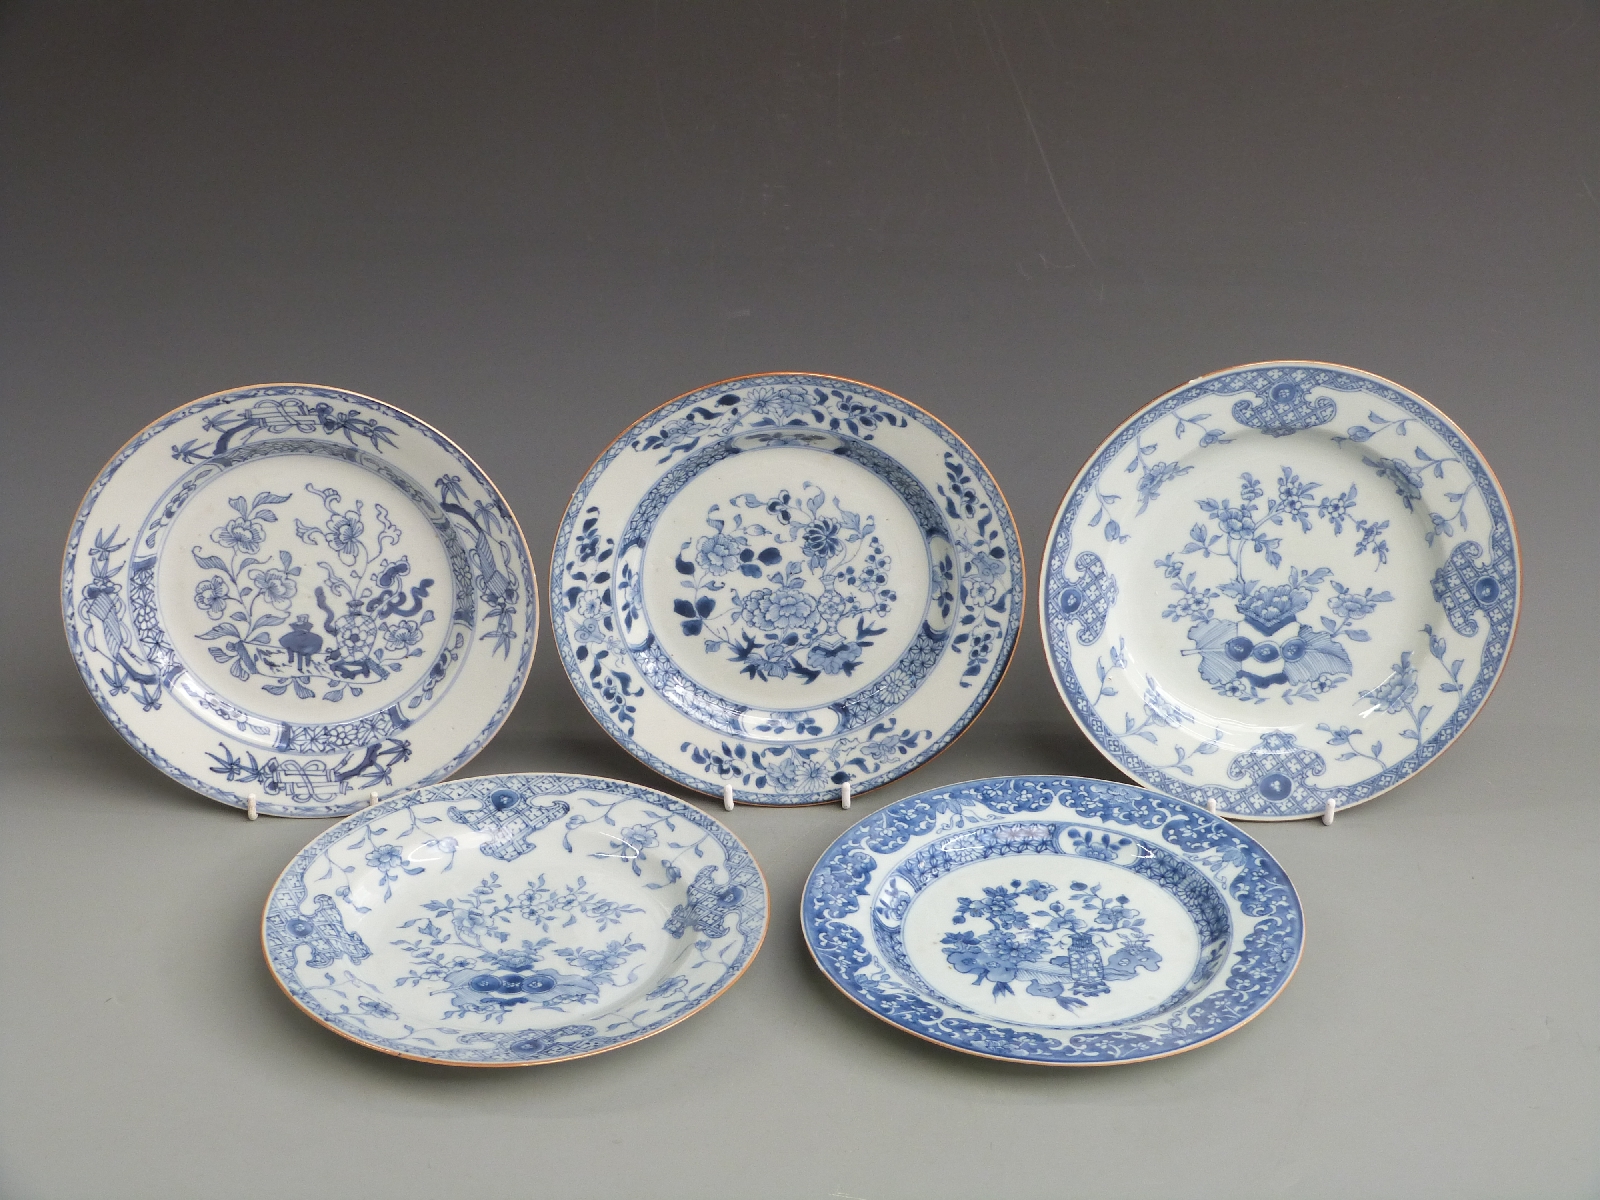 Five 19thC Chinese export plates decorated with vases of peonies, chrysanthemums, fruit and